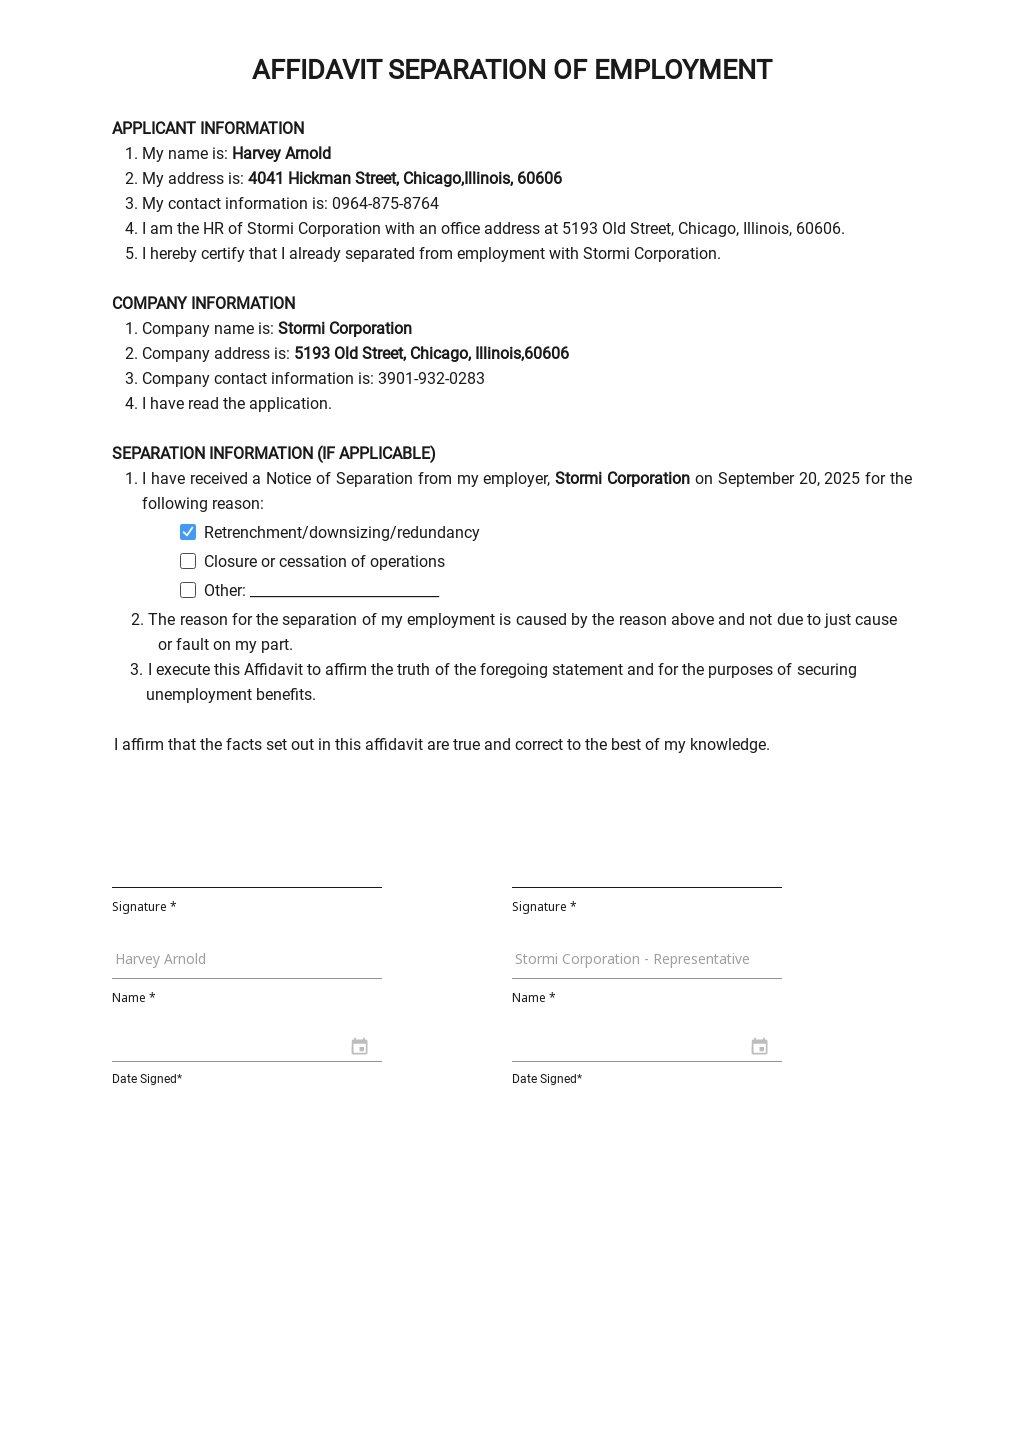 Affidavit Of Separation Of Employment Template in Word, Google Docs